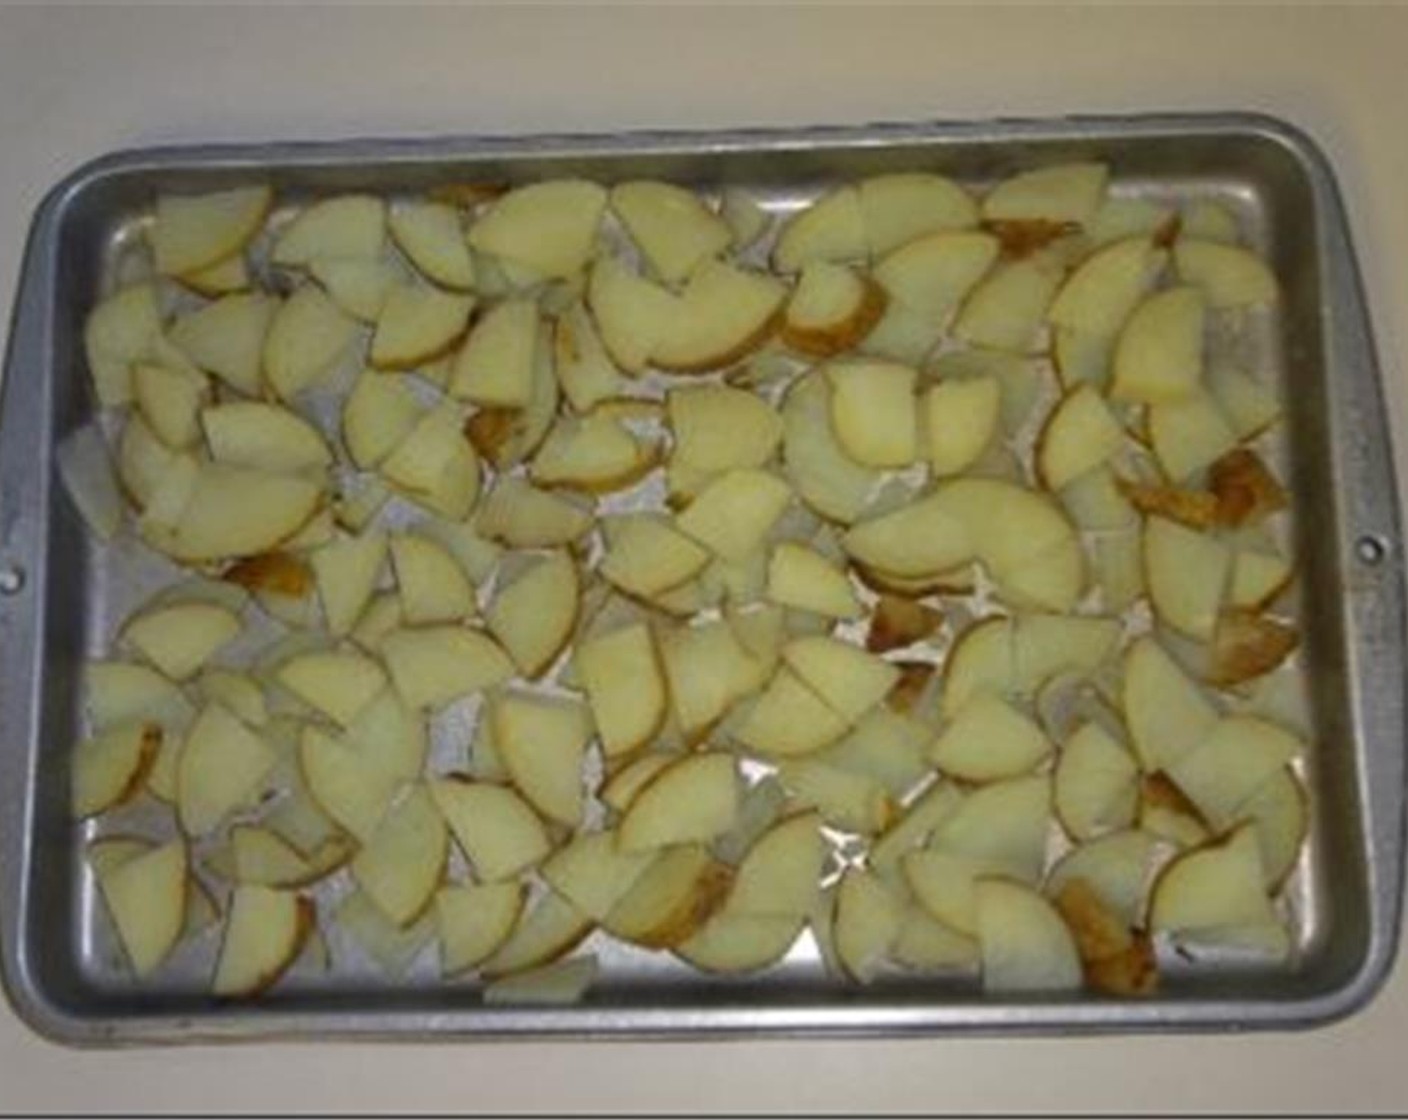 step 5 Drain potatoes and place them on a cooking sheet nor layer thick. Place in 350 degrees F (180 degrees C) oven for 10 minutes to dry out. This allows you to add more flavor and prevent the final product from becoming too wet.